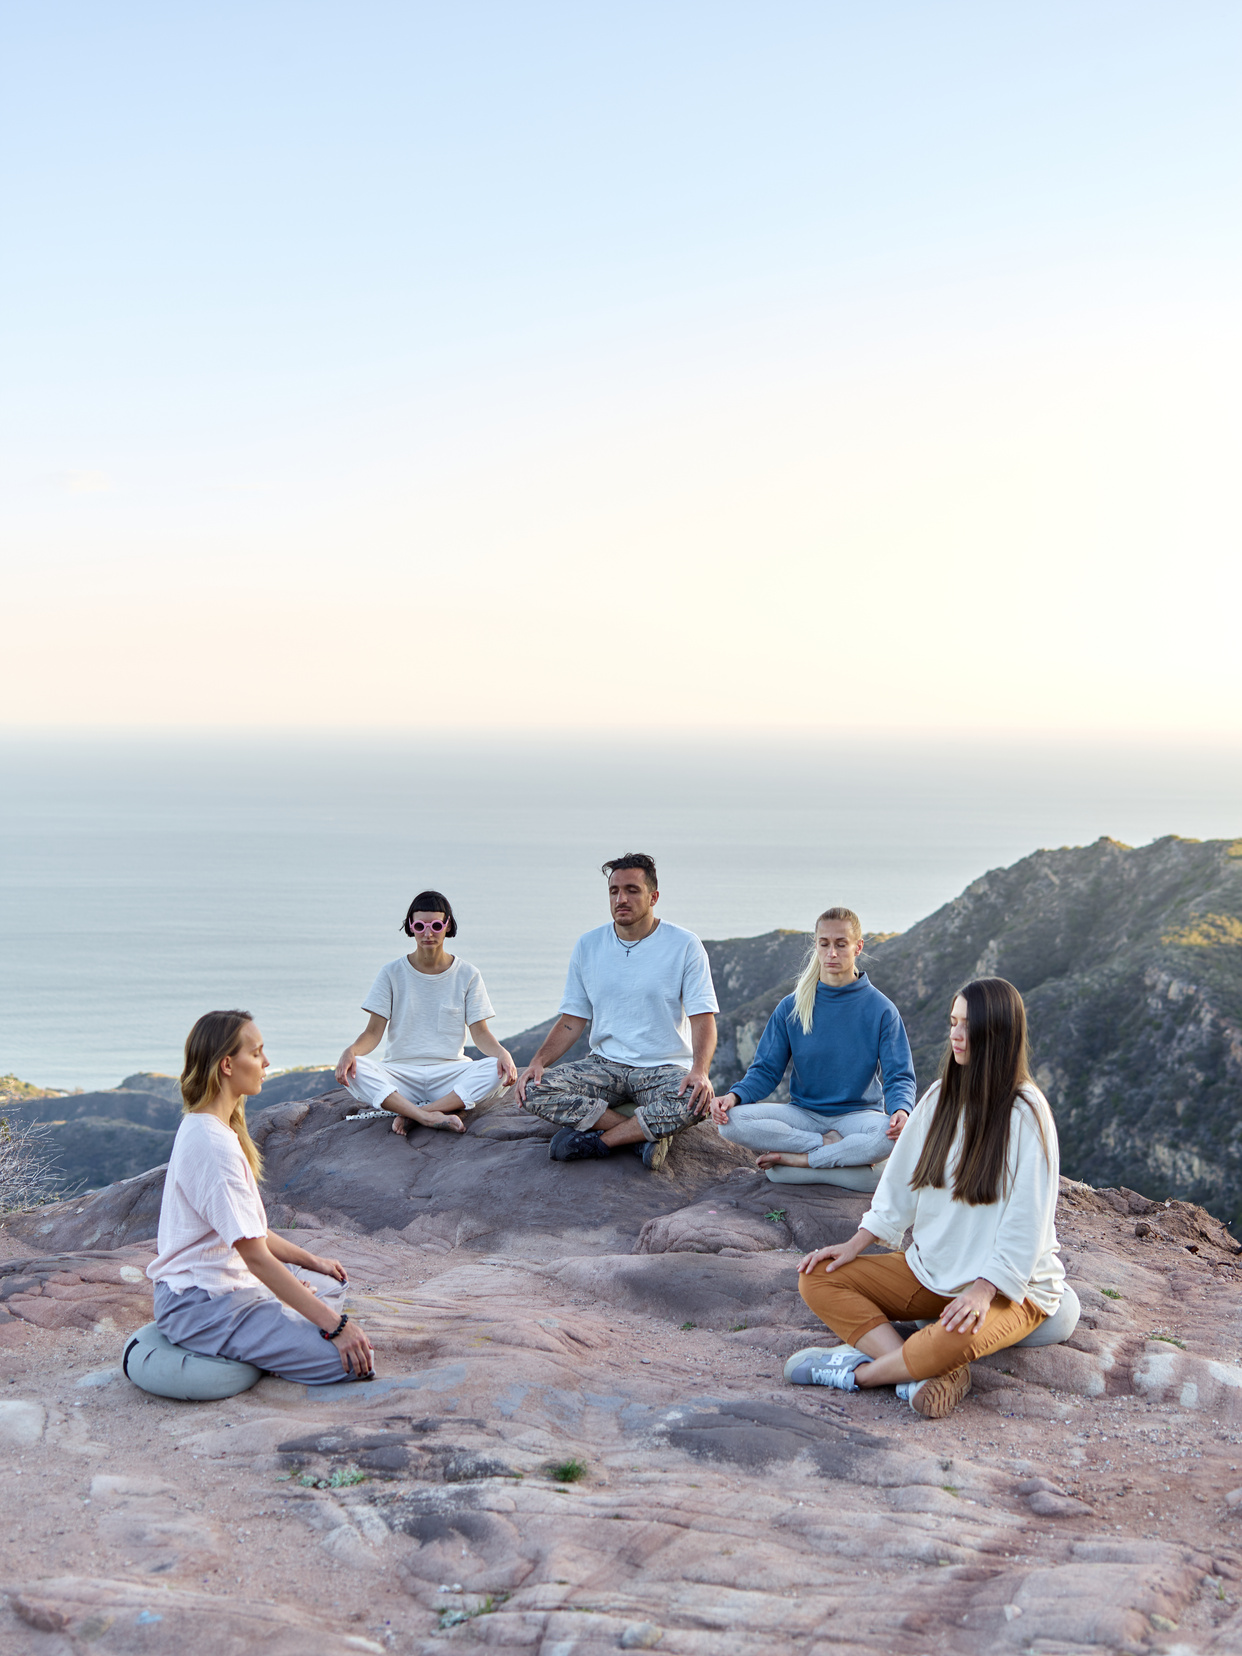 A Group of People Meditating on a Beach